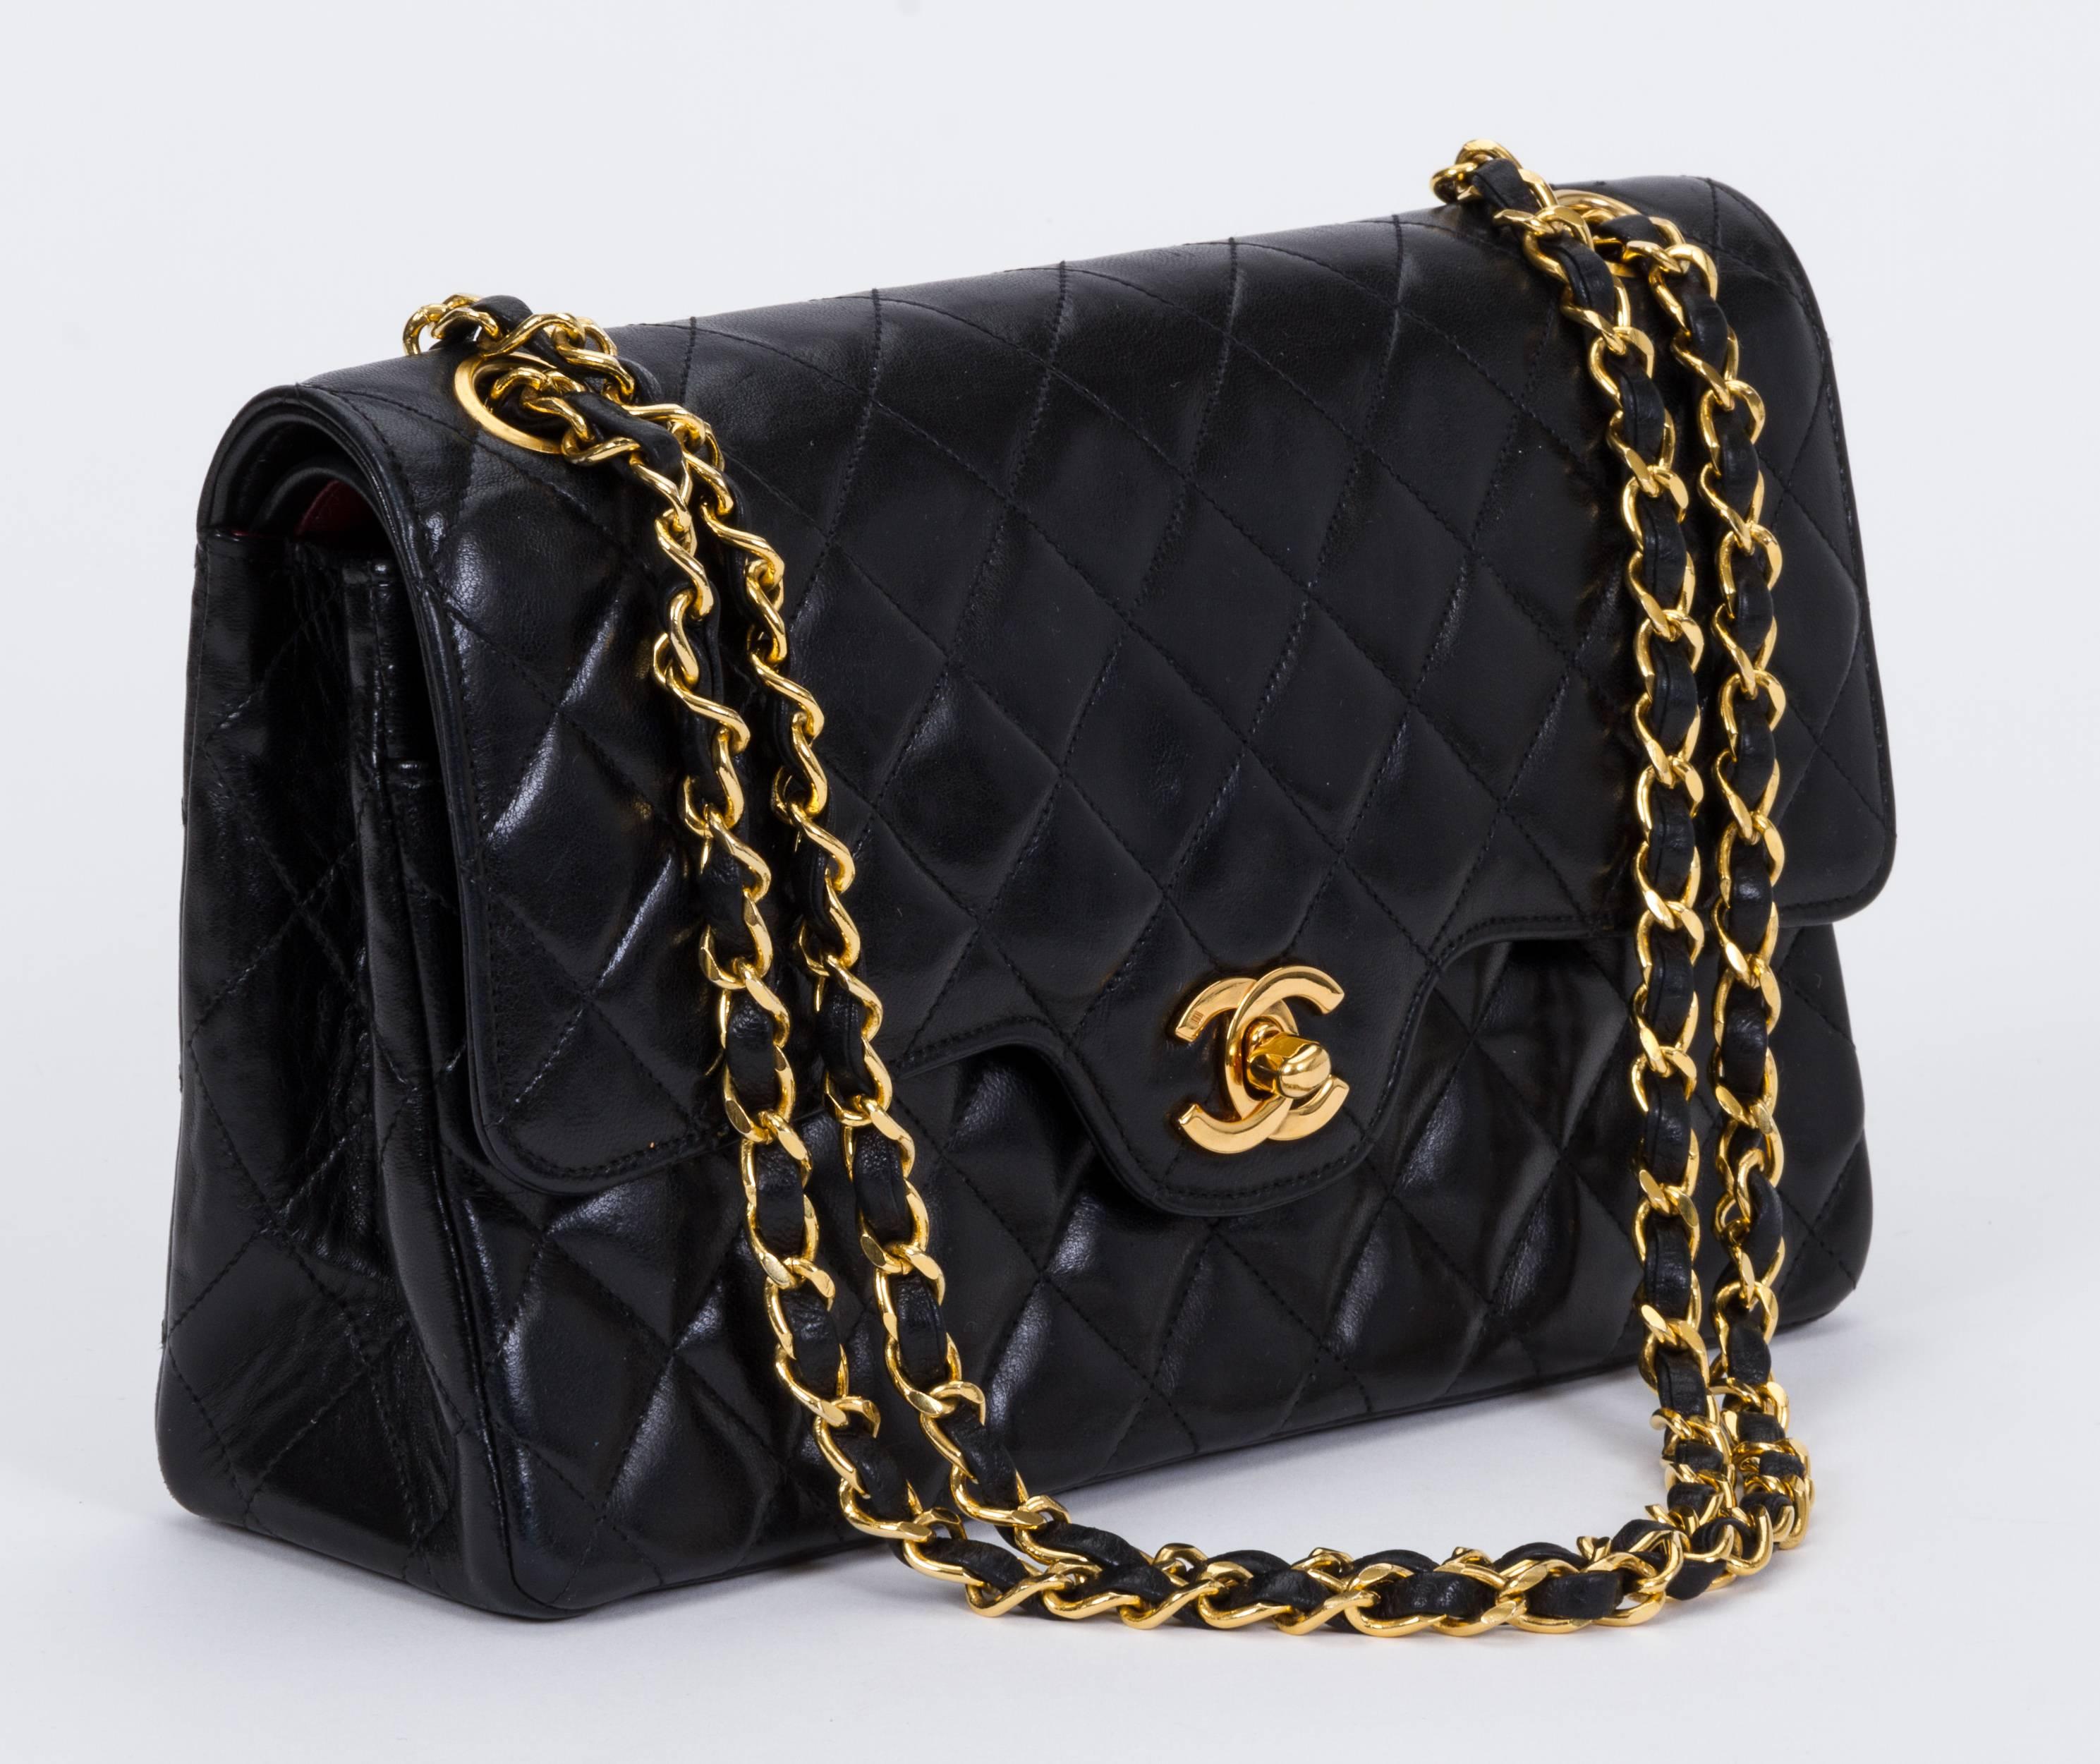 Chanel black lambskin double flap with gold tone hardware. Shoulder drop 9